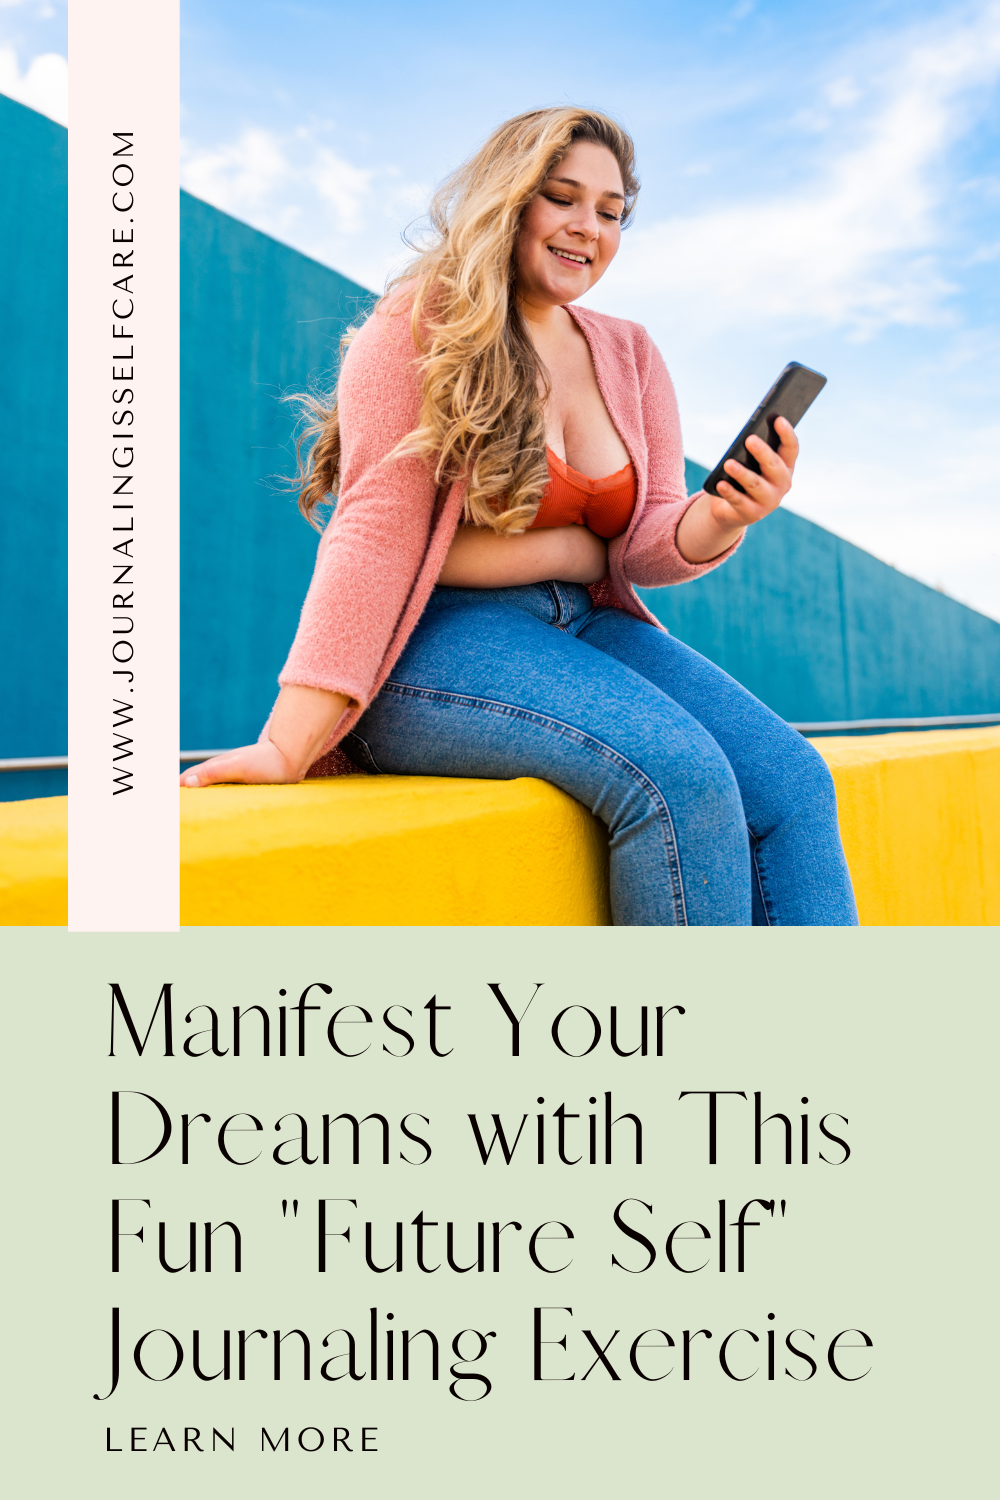 Manifest Your Dreams witih This Fun "Future Self" Journaling Exercise